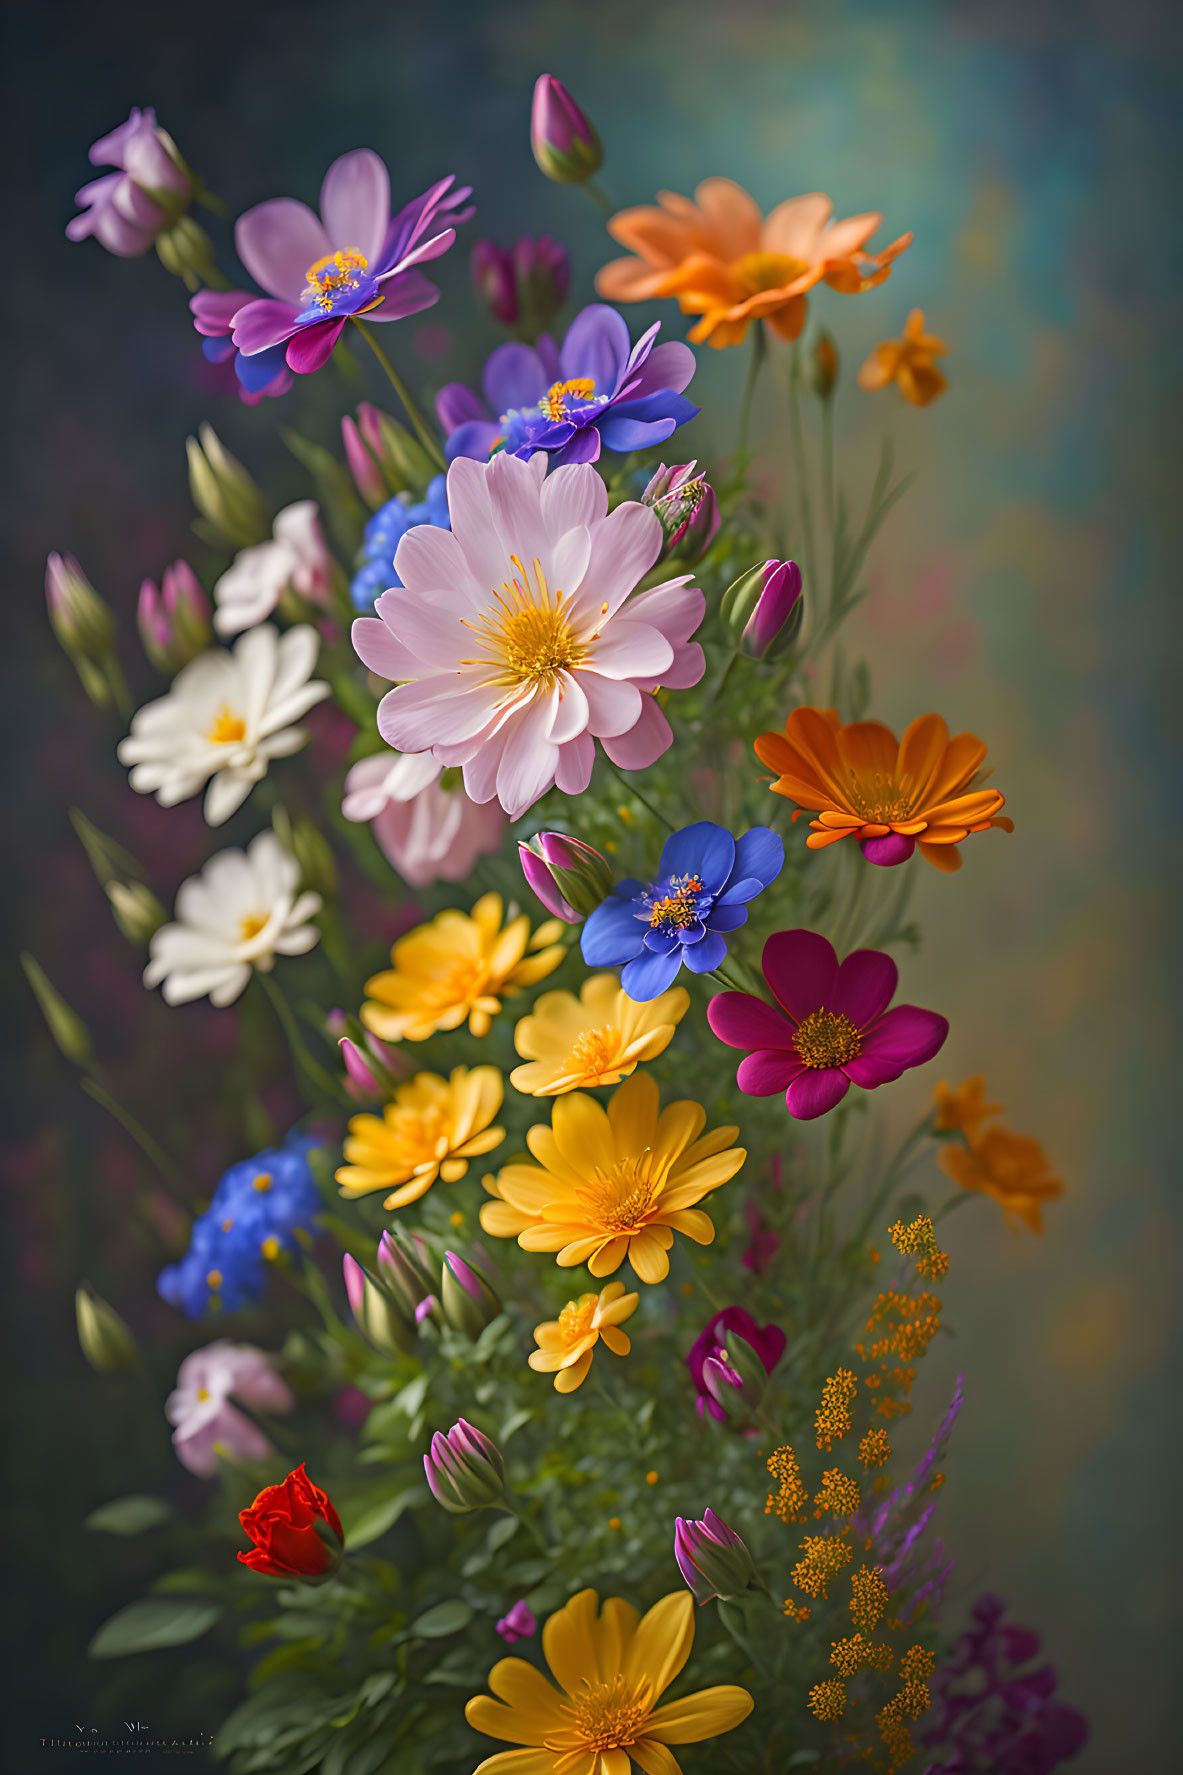 Flowers of various types and colors